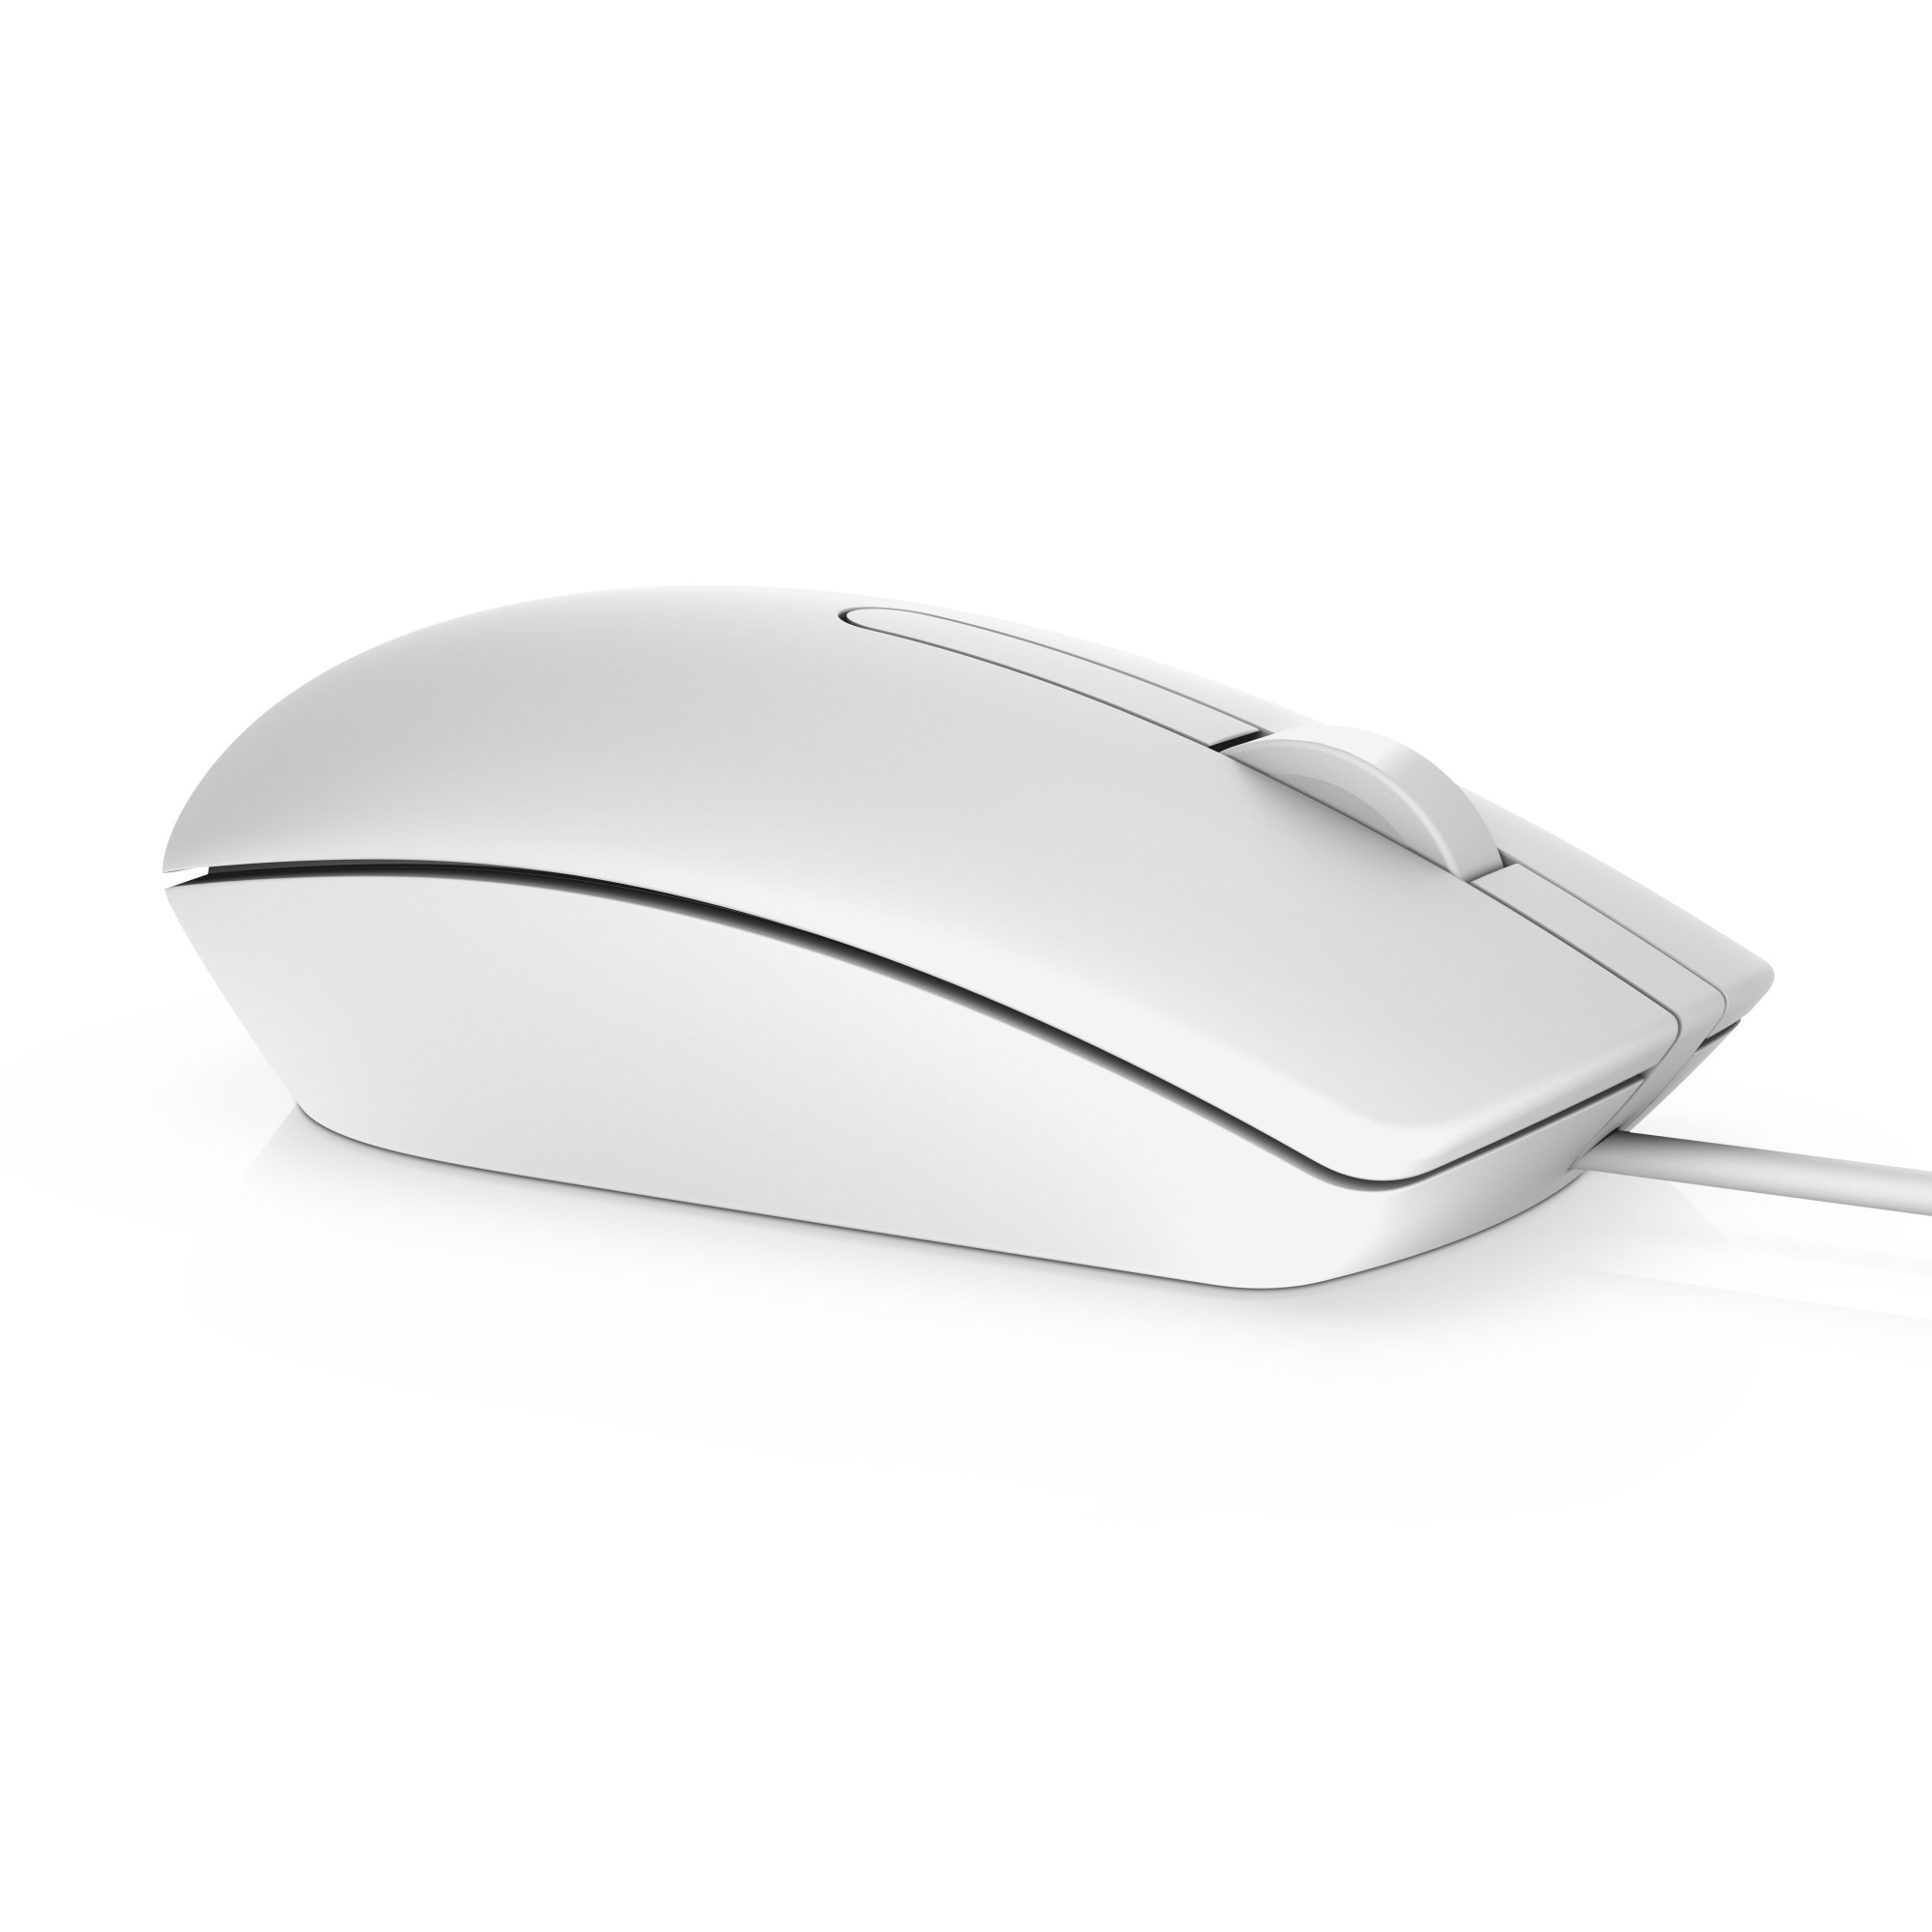 DELL MS116 mouse USB Type-A Optical 1000 DPI Ambidextrous